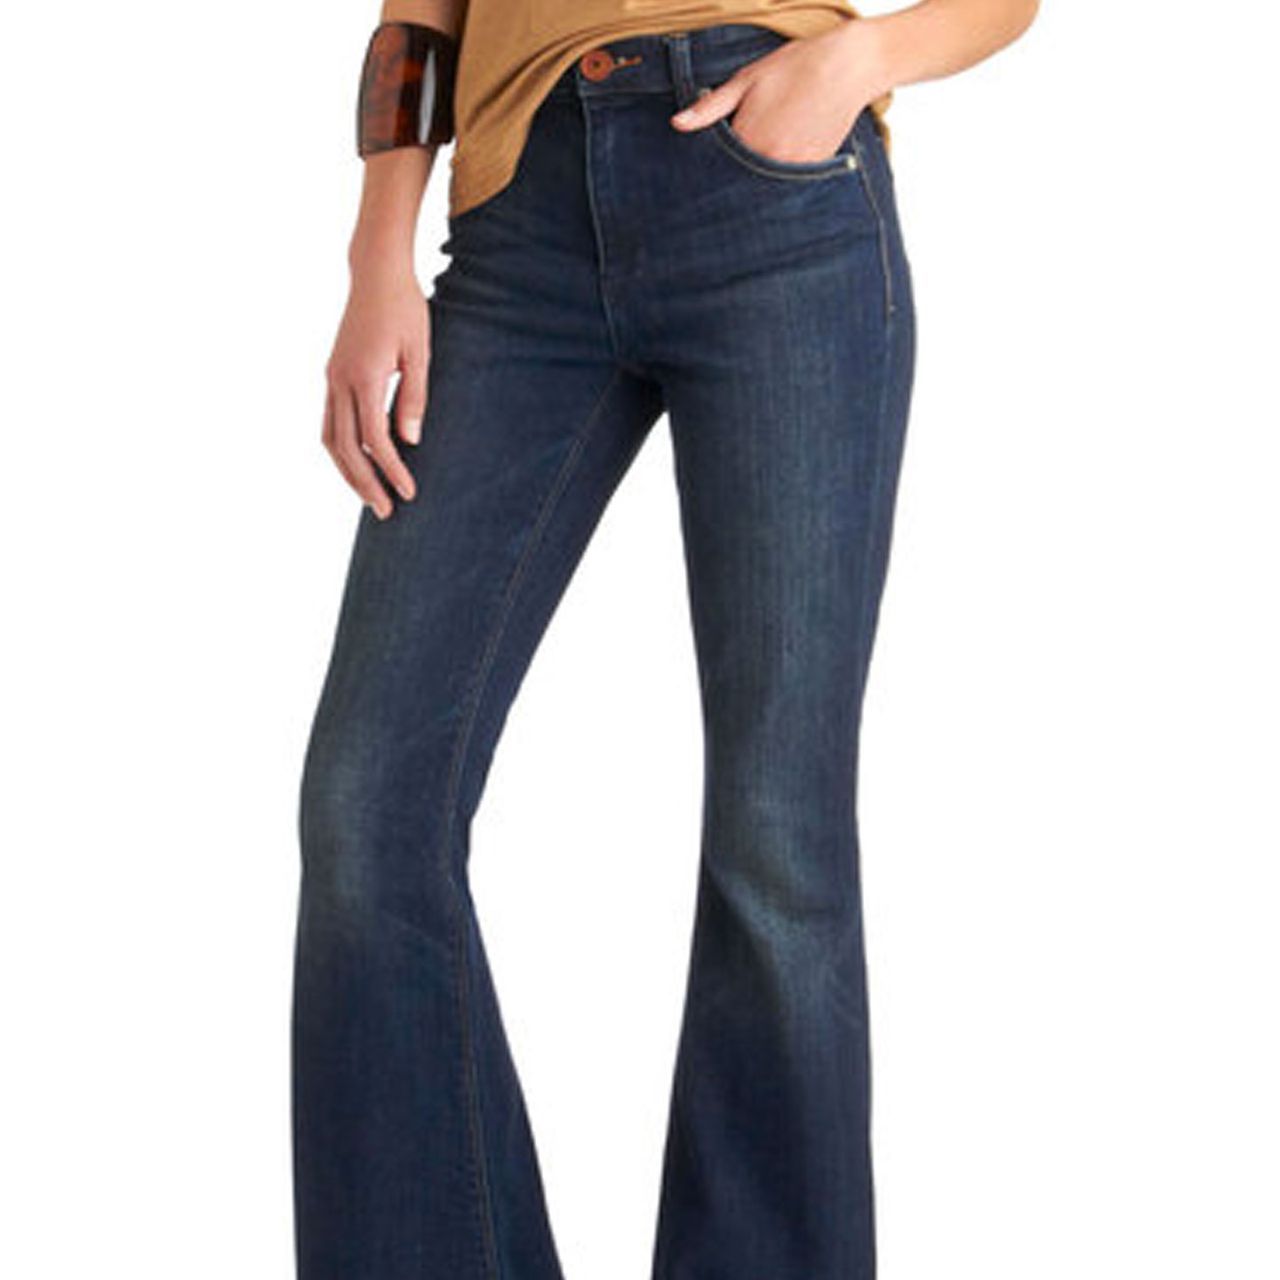 most flattering jeans